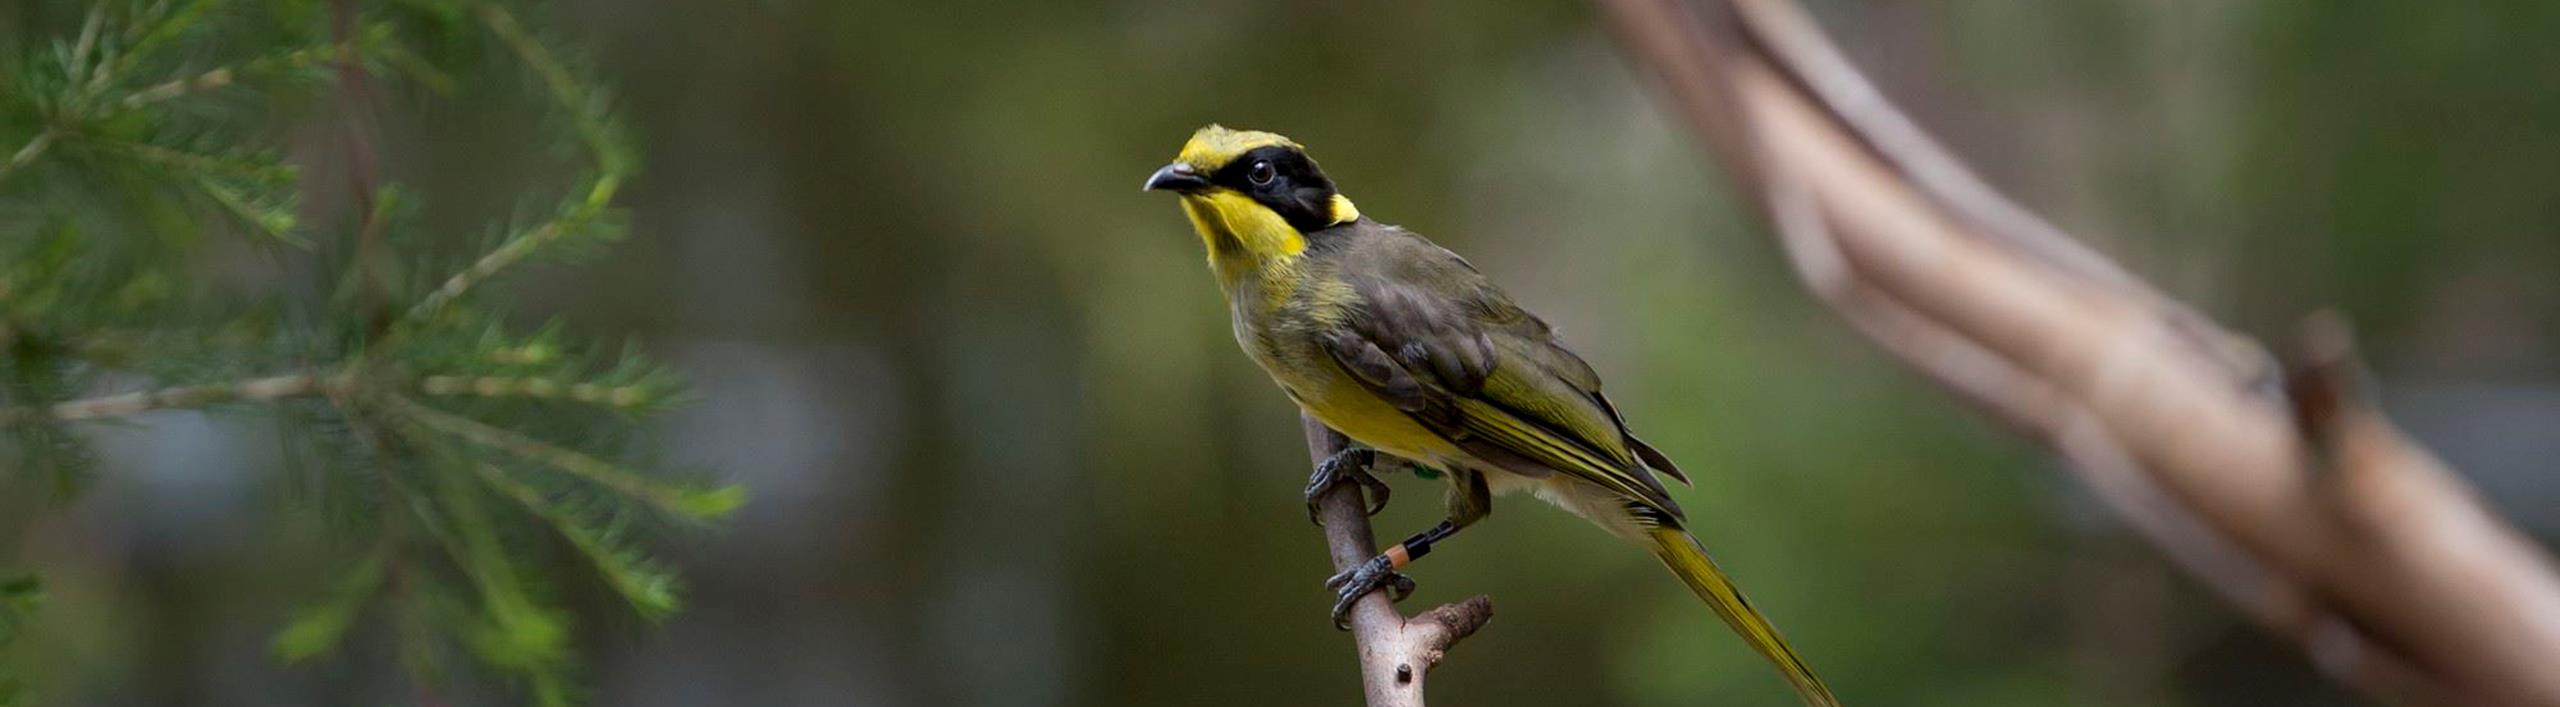 Young Helmeted Honeyeater sitting in a tree.